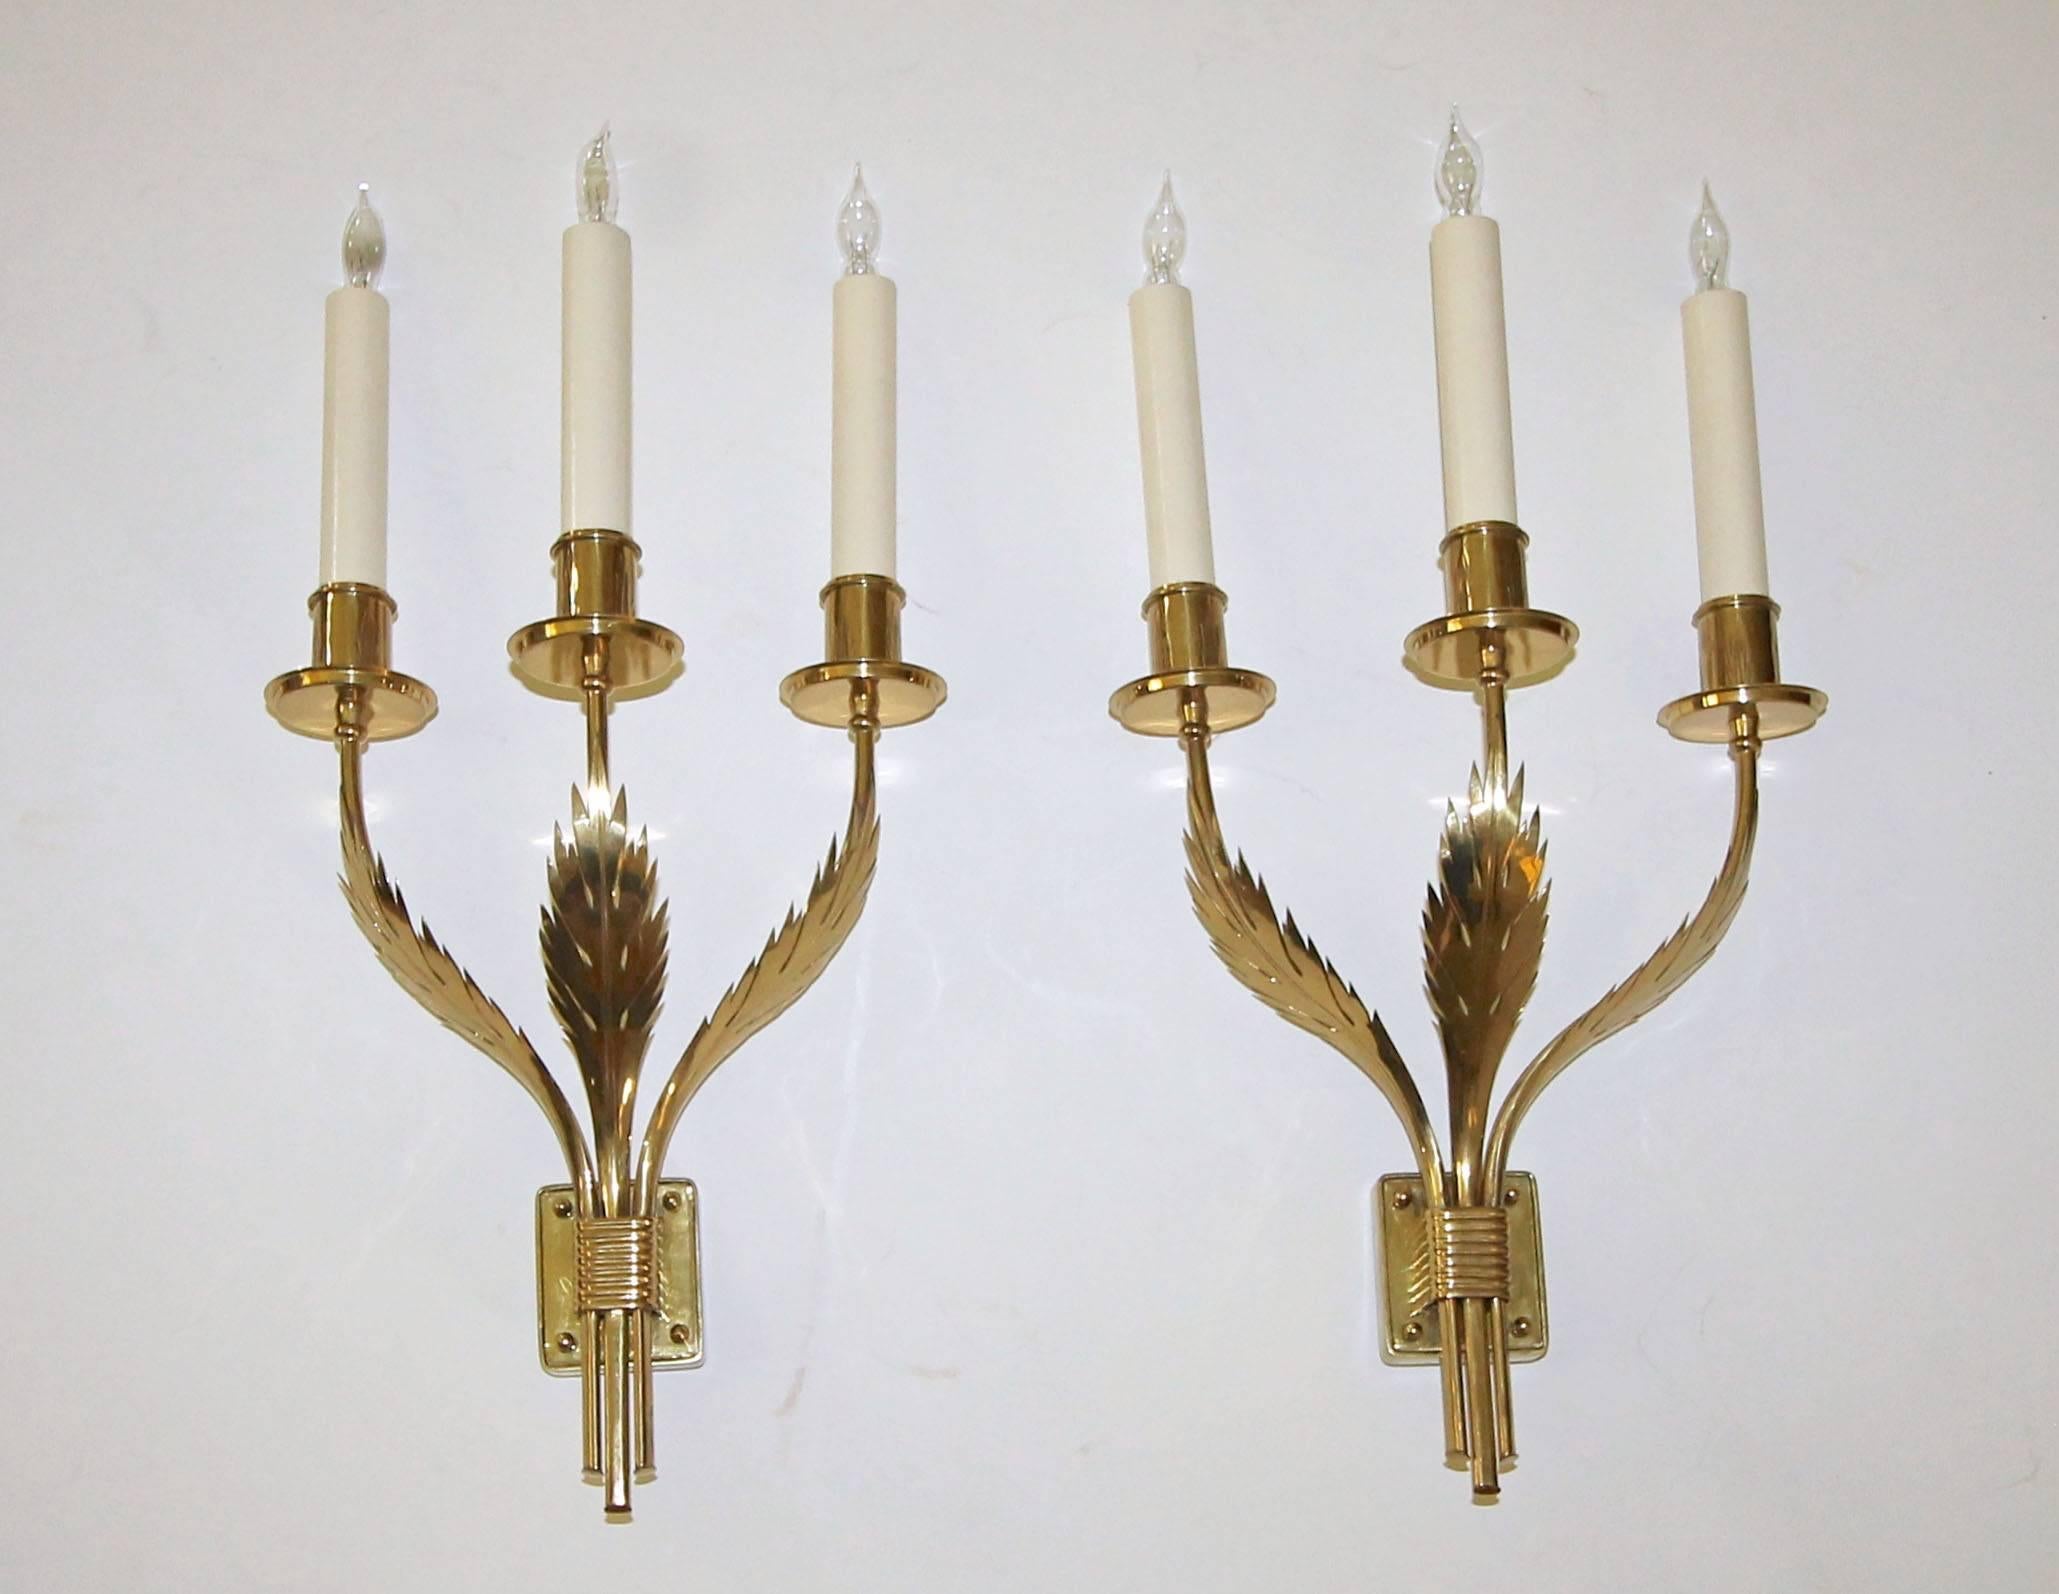 Pair of extremely rare Tommi Parzinger designed wall sconces for Parzinger Originals, handcrafted by Felix Balbo. Solid brass construction with beautiful acanthus leaf motif that is repeated on each candle cup. Newly wired and retaining the original